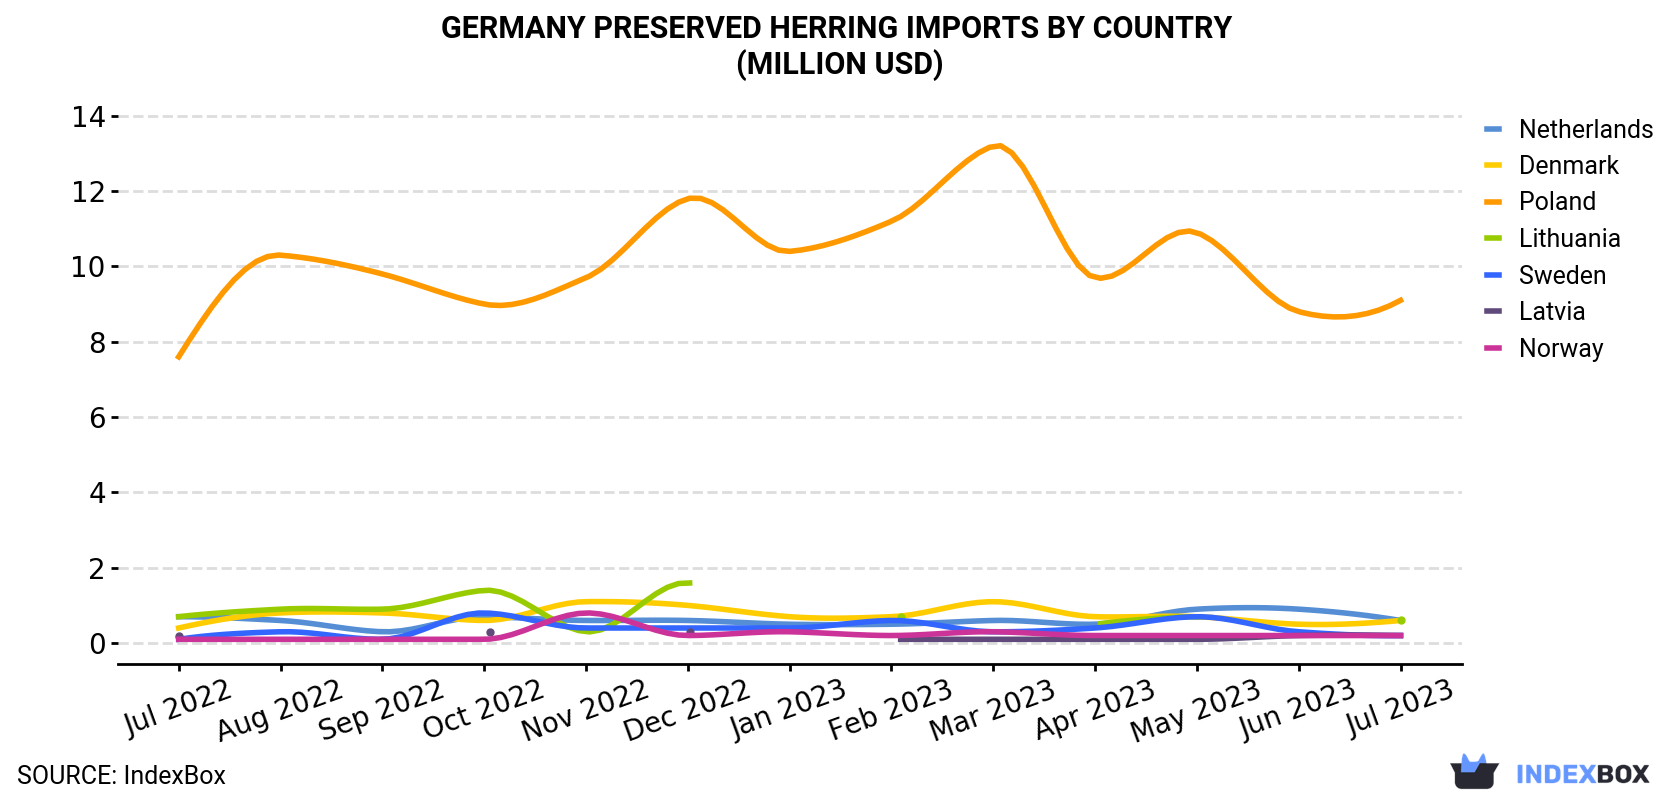 Germany Preserved Herring Imports By Country (Million USD)